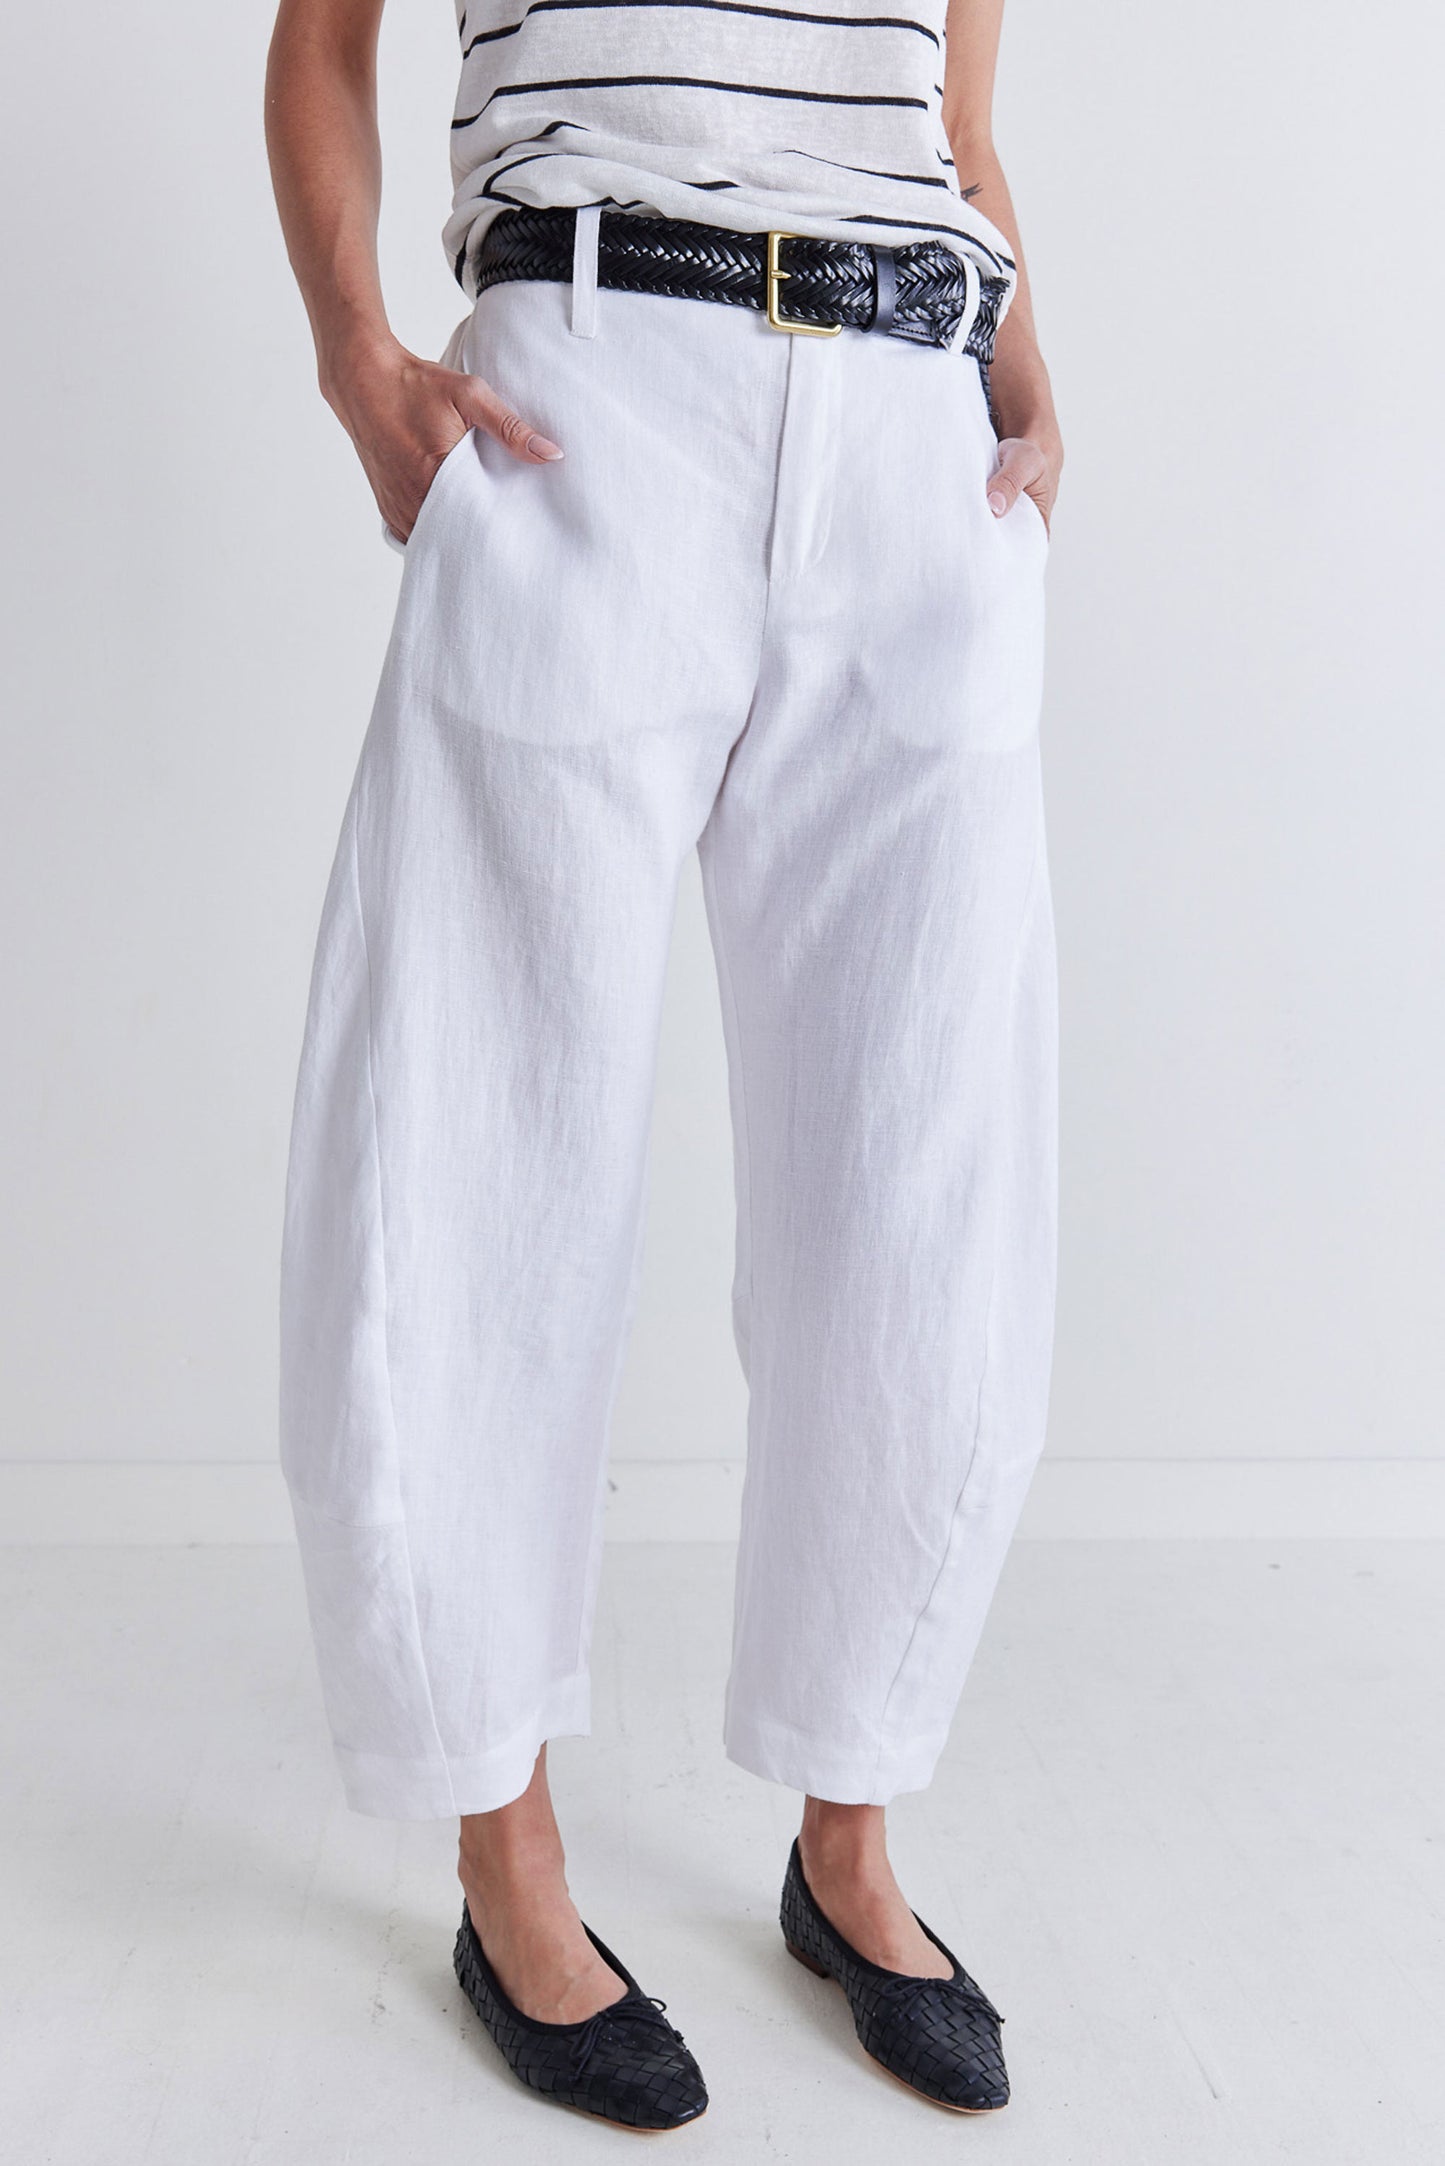 The Uptown Loose Linen Pants